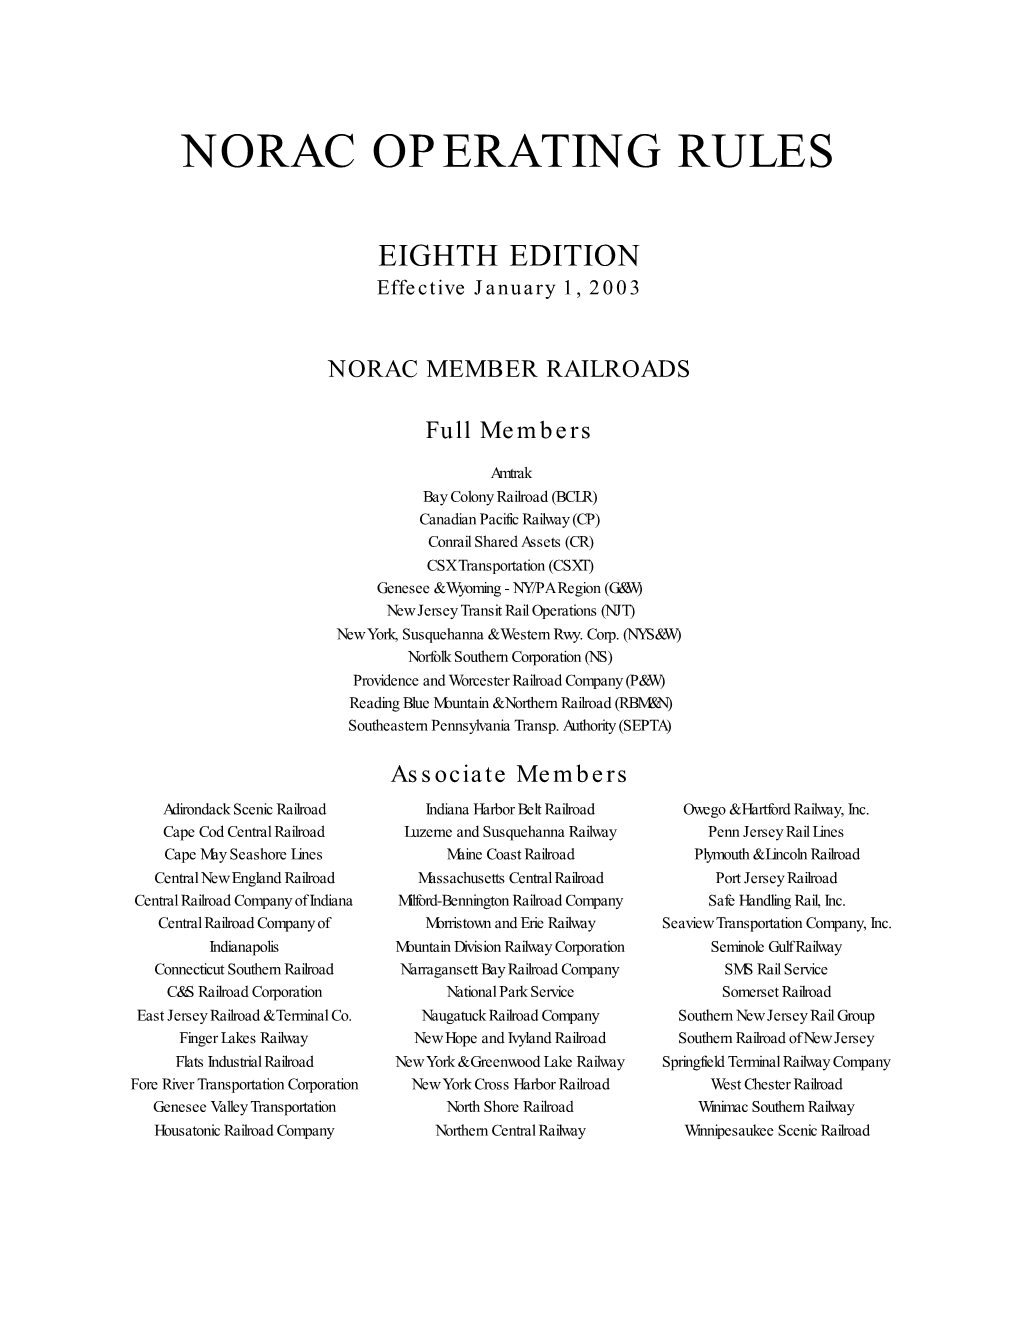 Norac Operating Rules